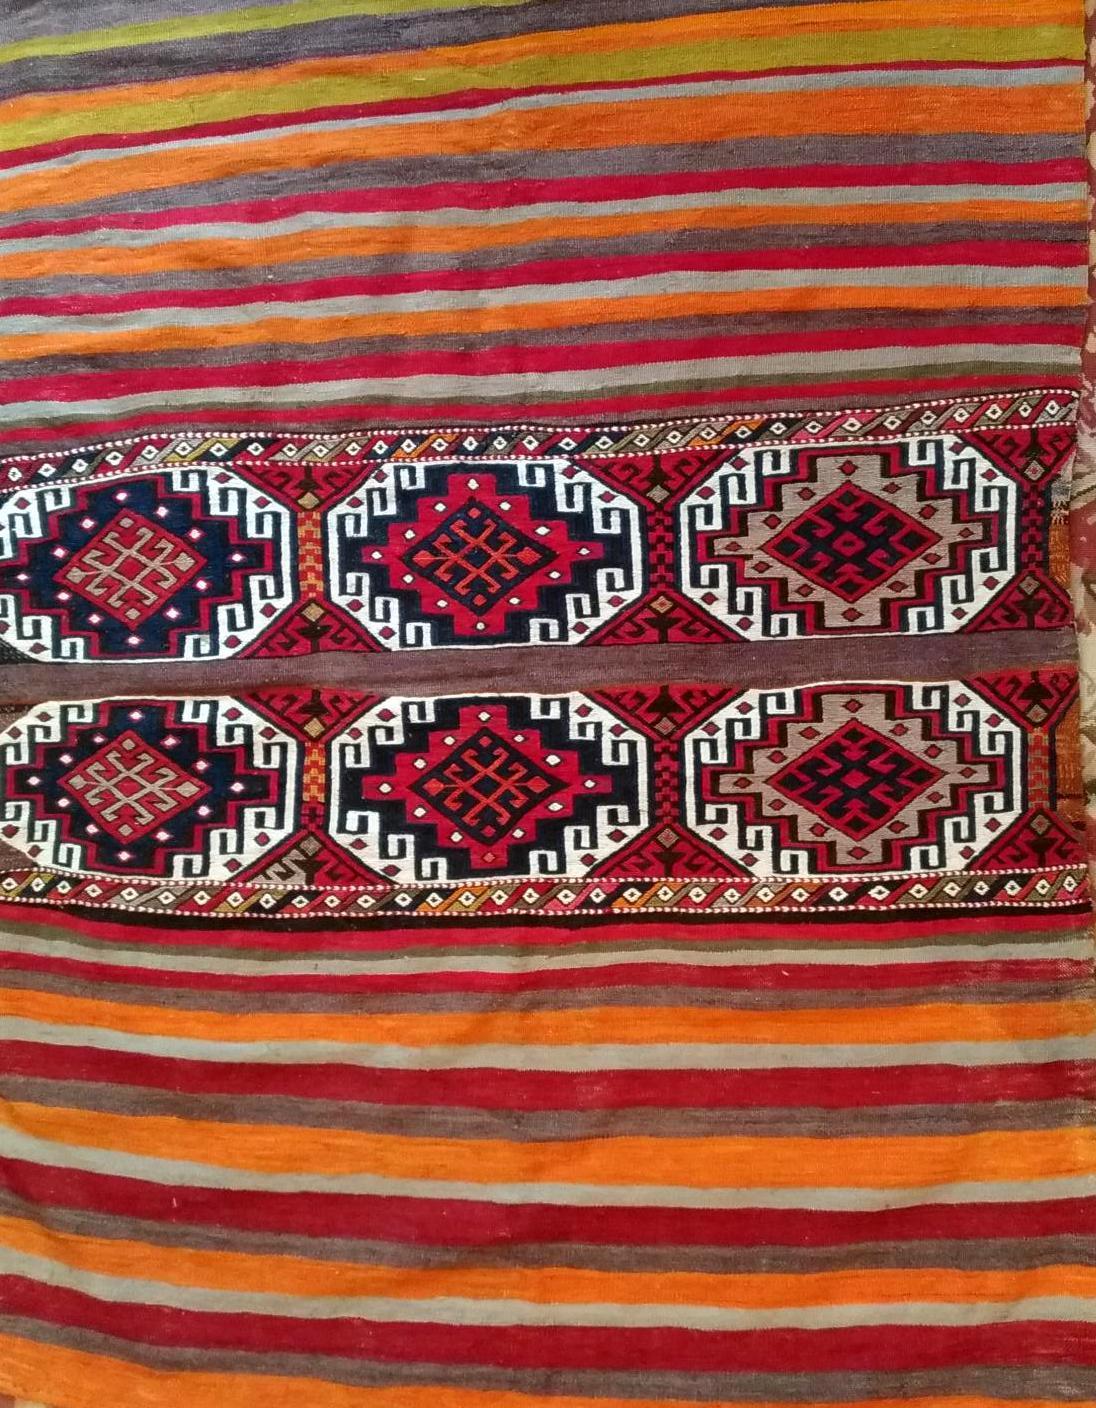 Very pretty Turkish chuval kilim woven and embroidered with fresh colors.